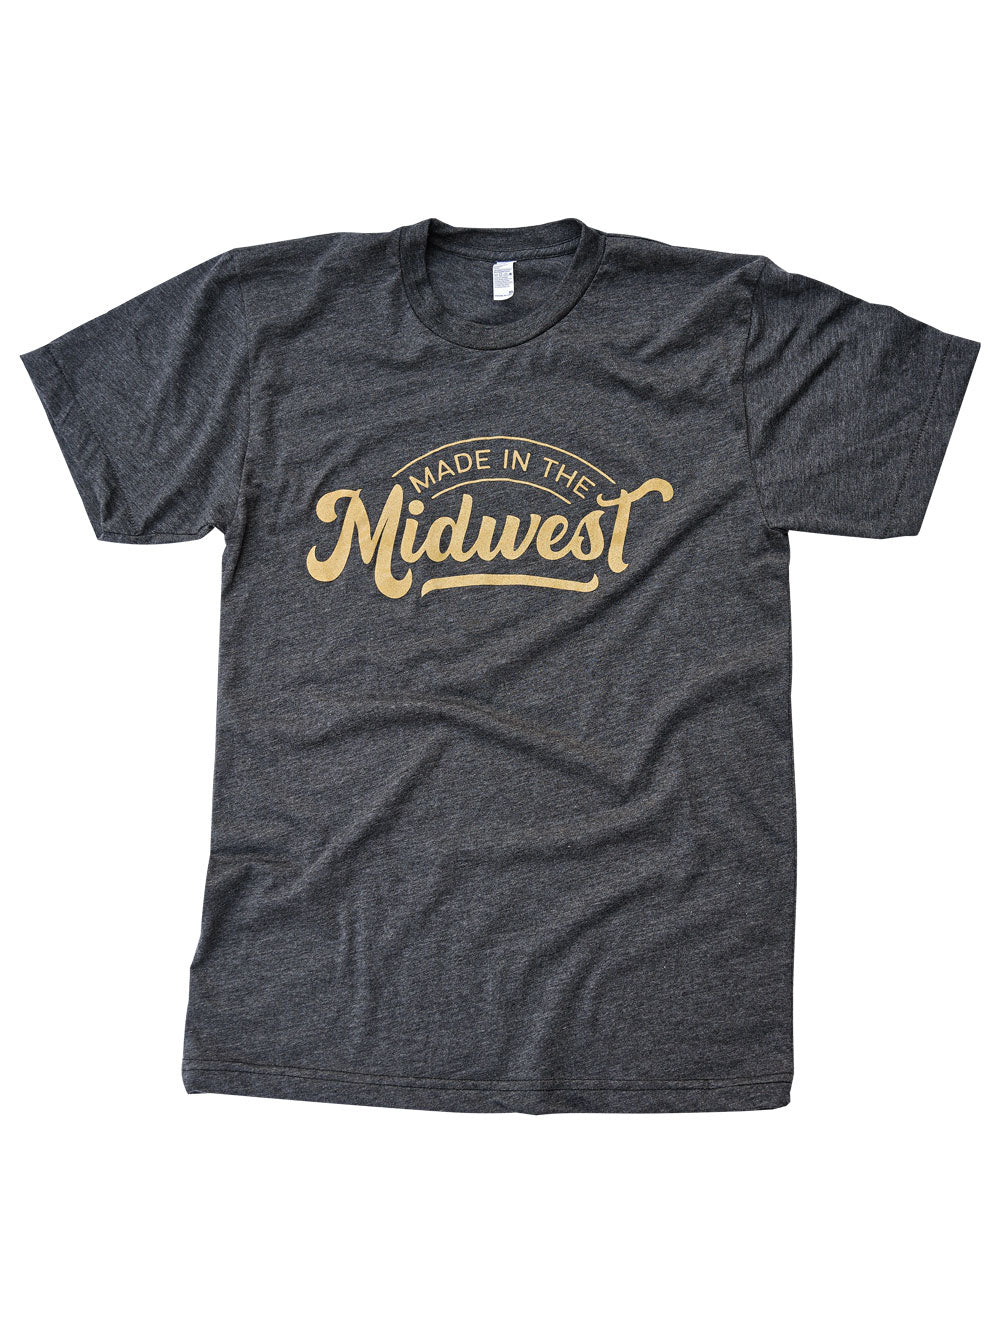 Made in the Midwest black heather t-shirt